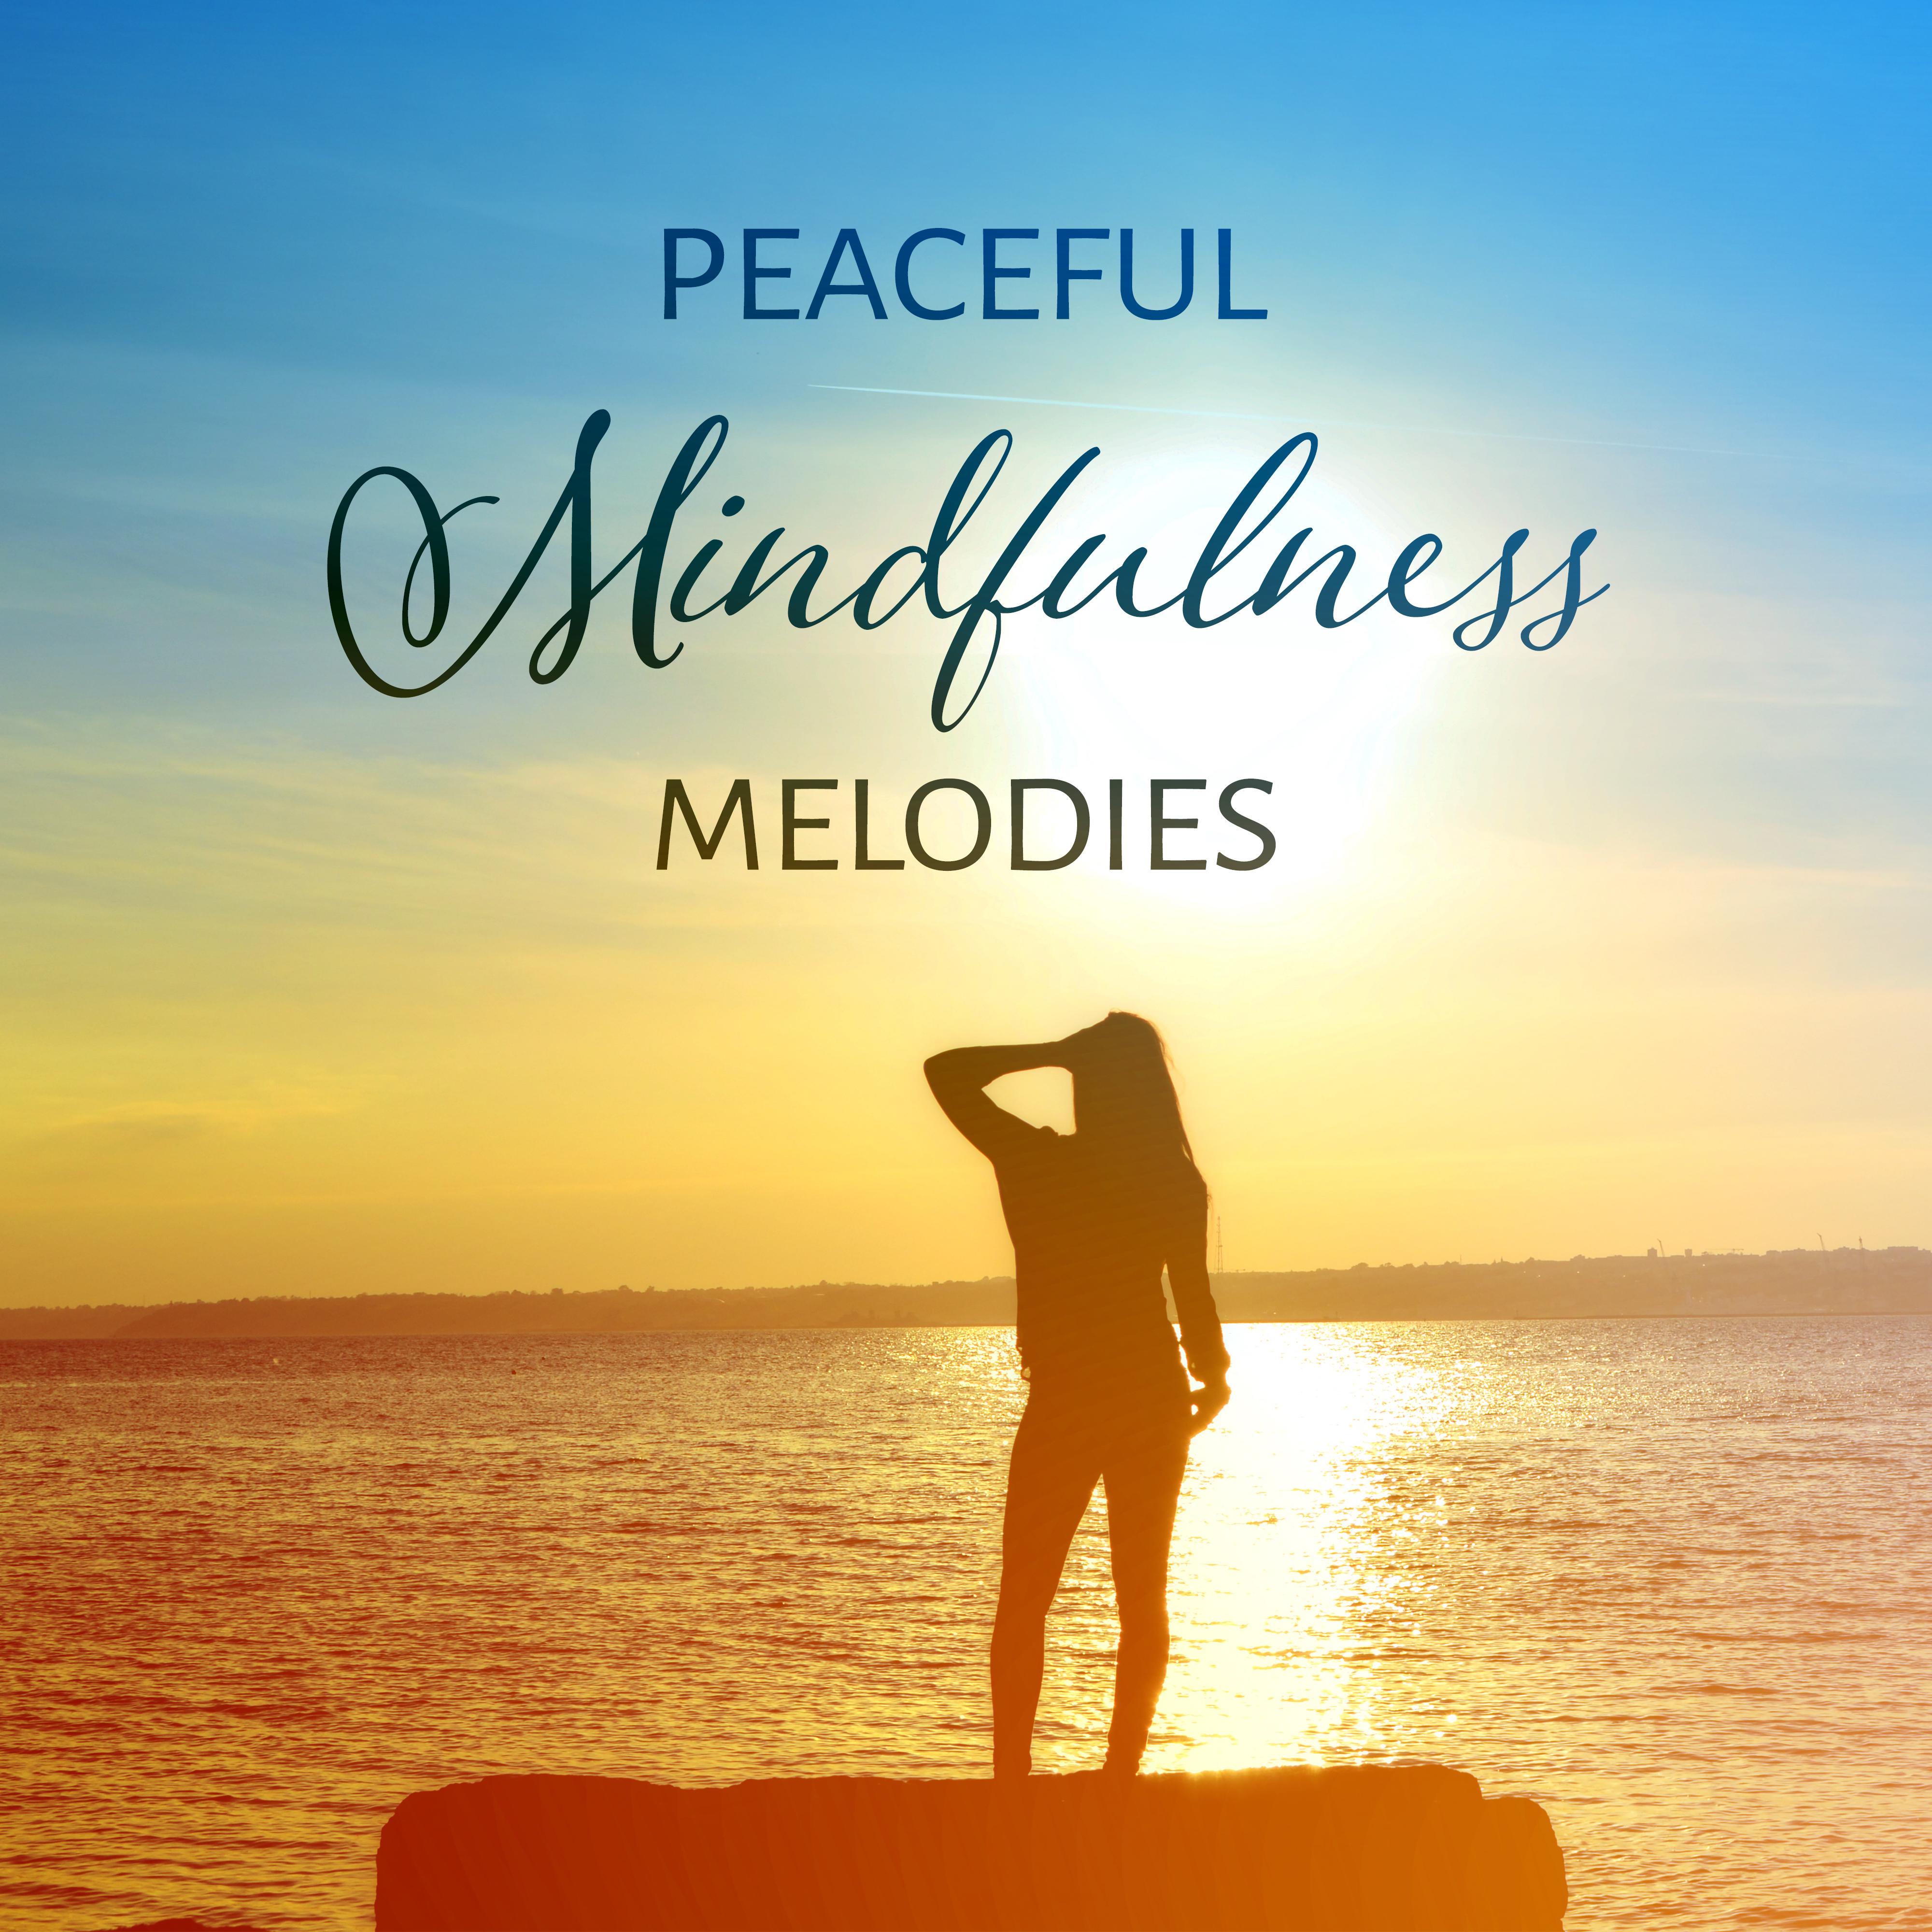 Peaceful Mindfulness Melodies